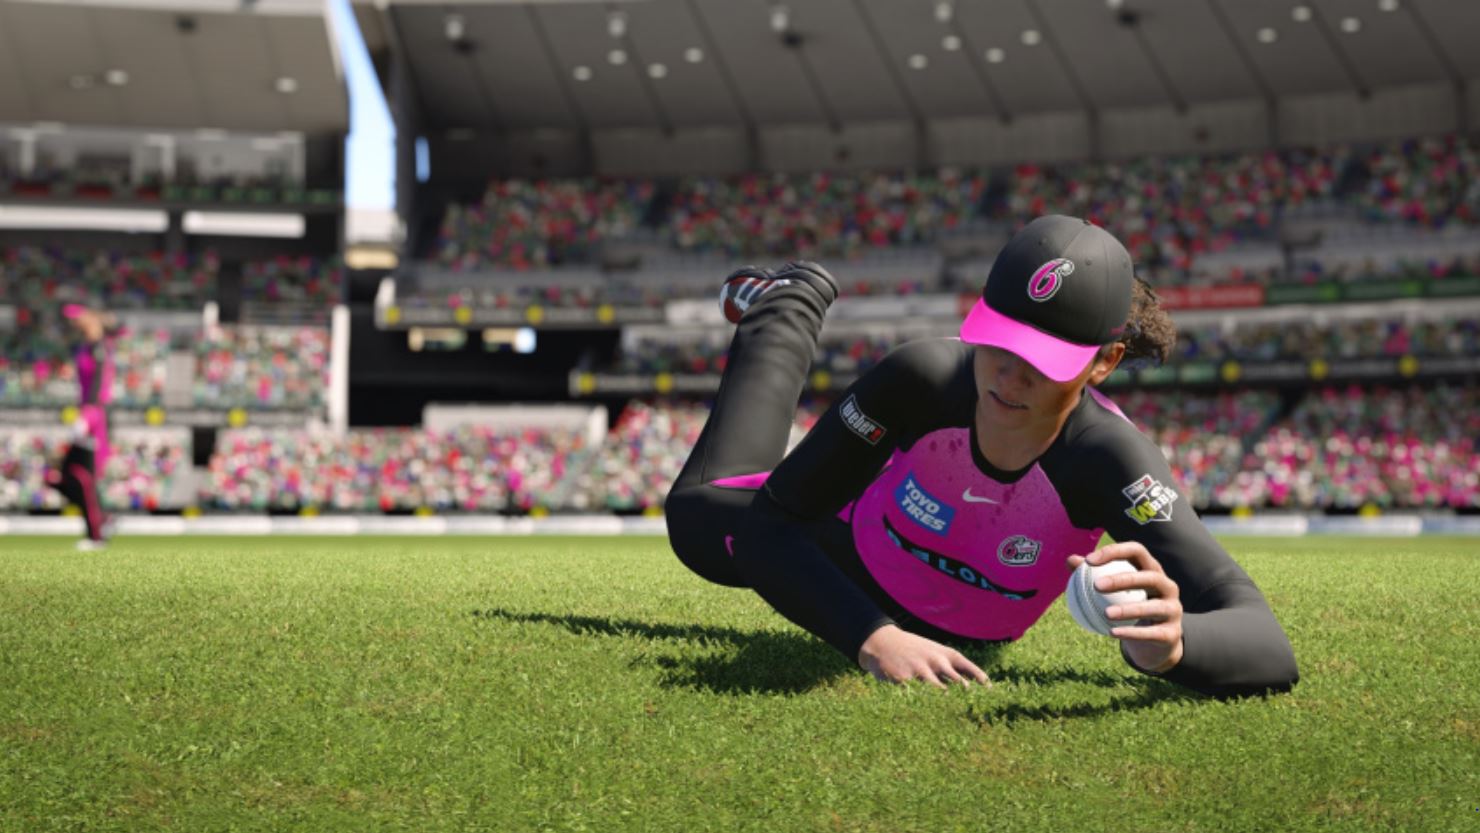 Cricket_24_Official_Game_Of_The_Ashes_sold_by_Technomobi